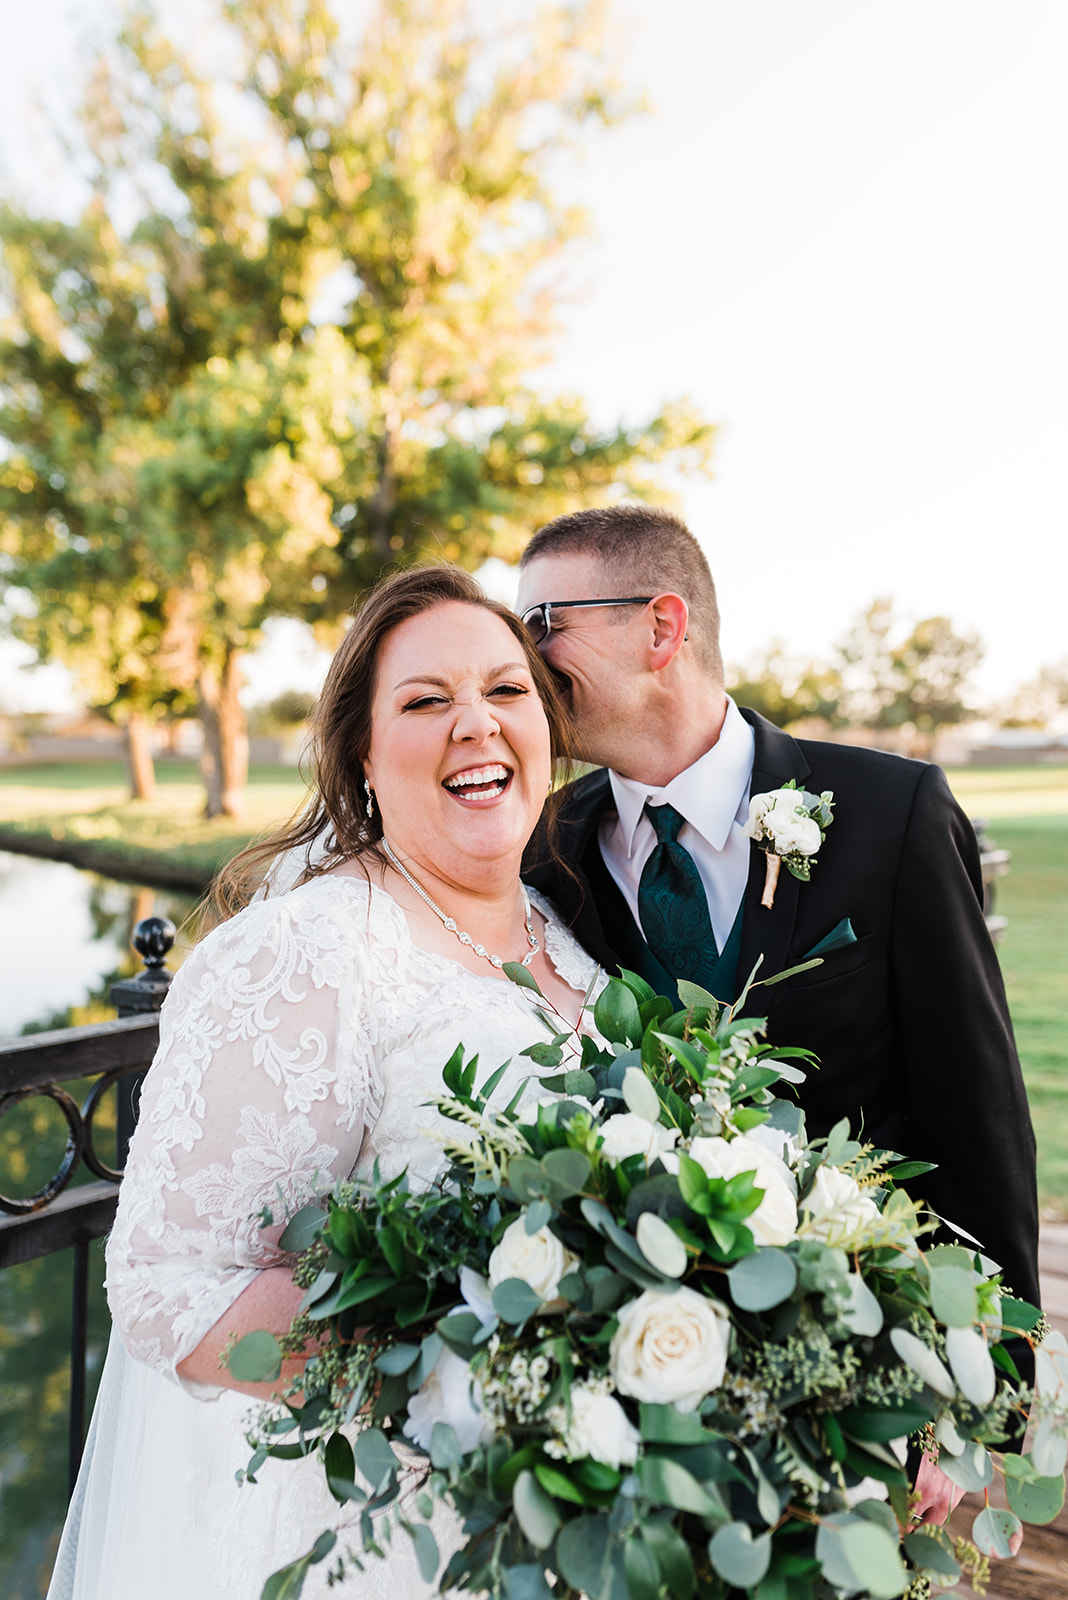 A bride laughs in a lace dress while holding a large white bouquet as her husband whispers in her ear at a Lindsay Grove Wedding